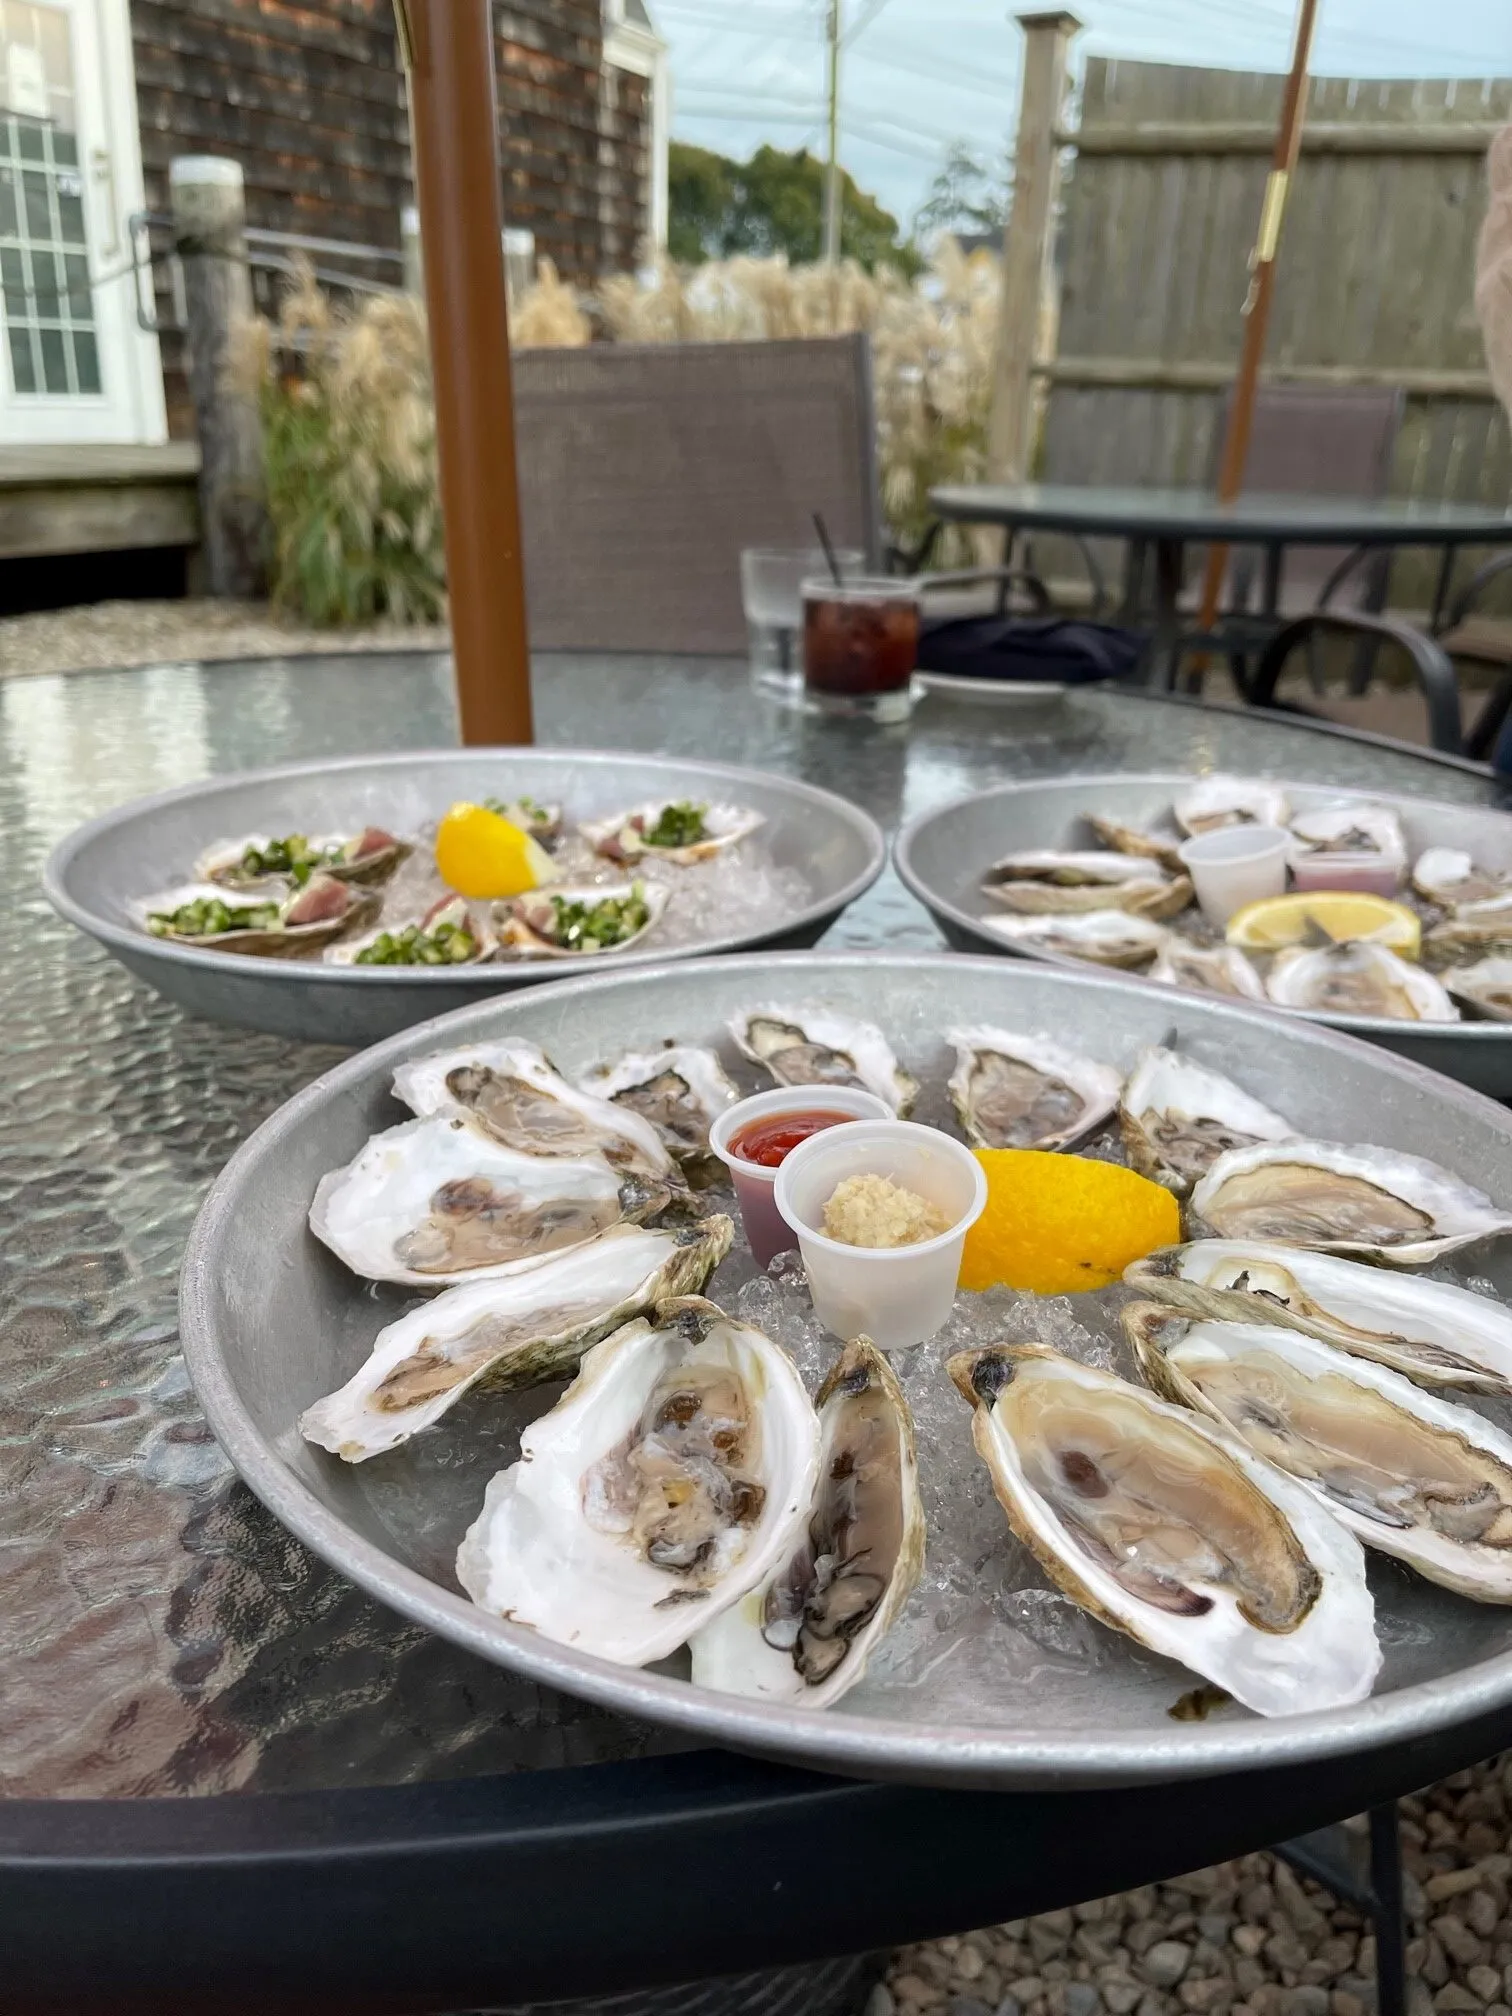 $1 oysters at The Oyster Company